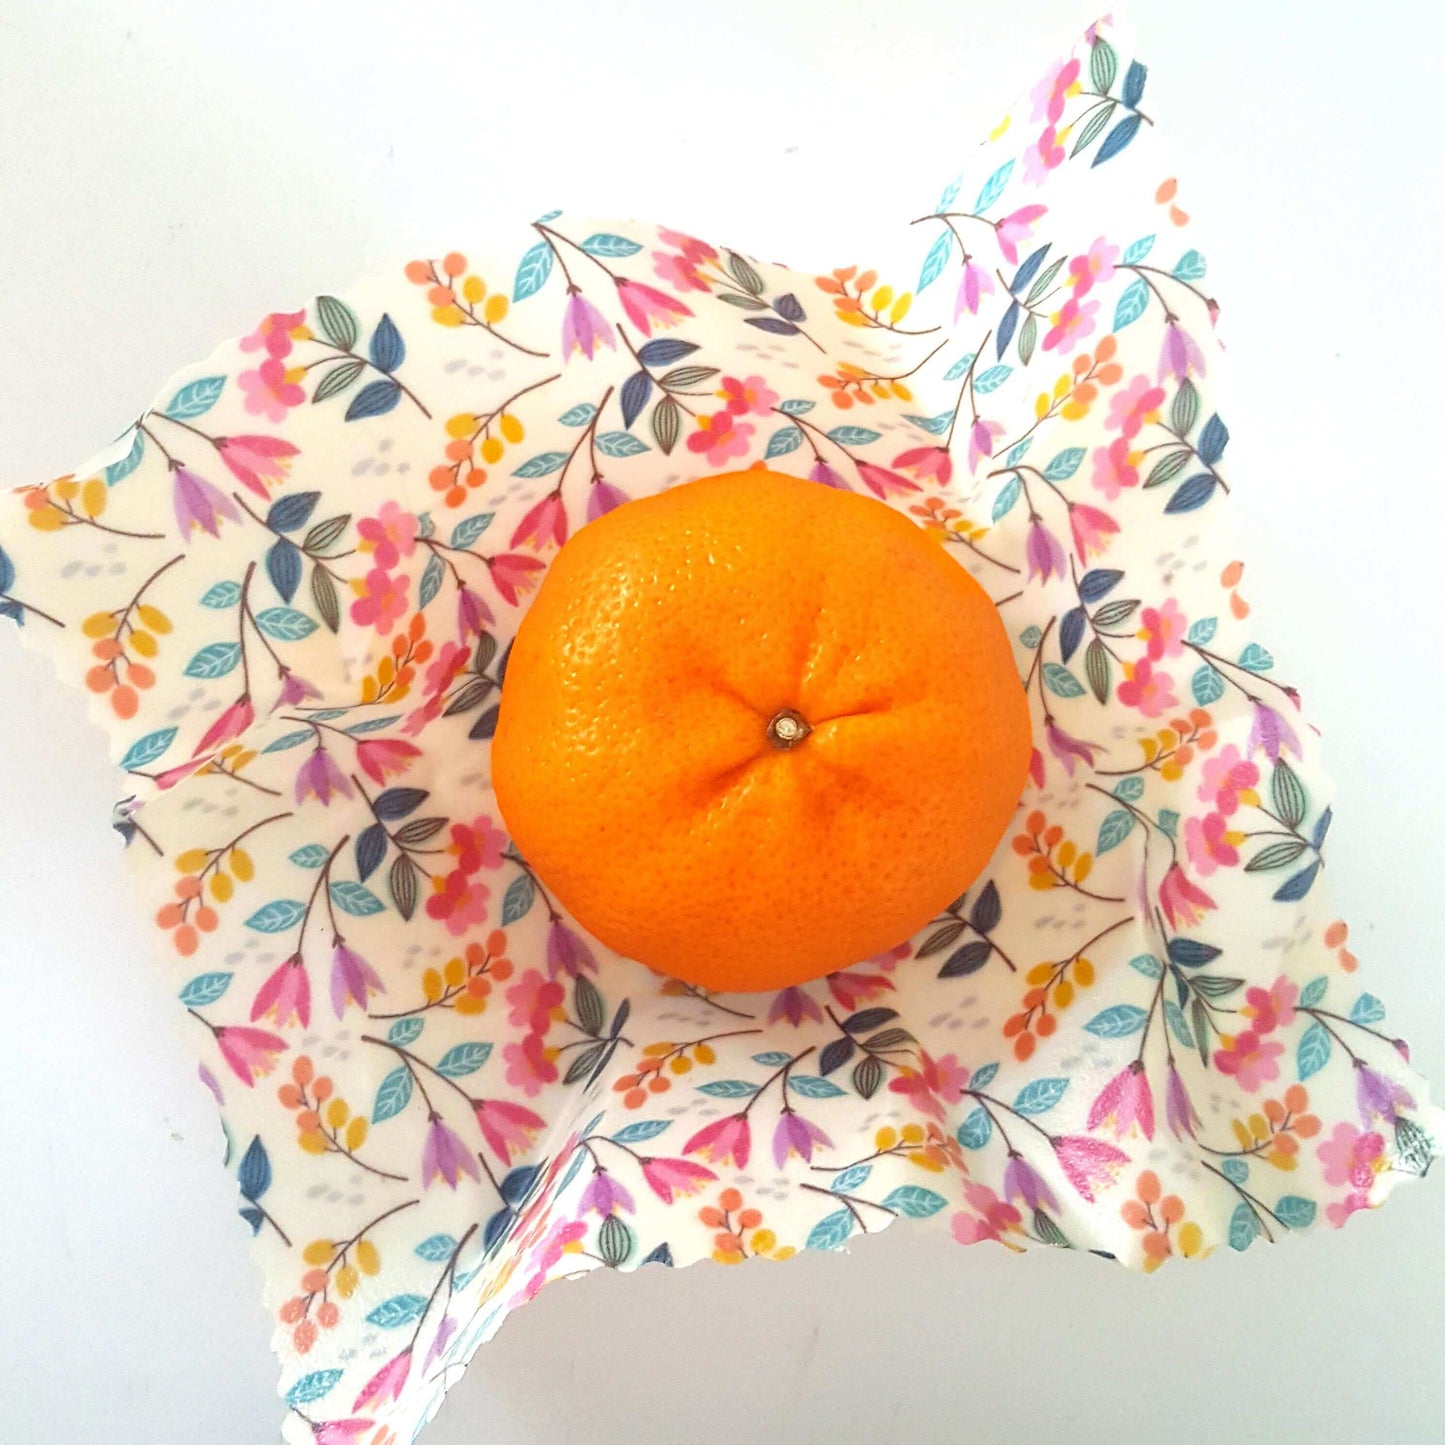 Reusable Beeswax Food Wraps 100% Hand Made in the UK by Honey Bee Good shown in Classic Set of 3 Meadow lifestyle